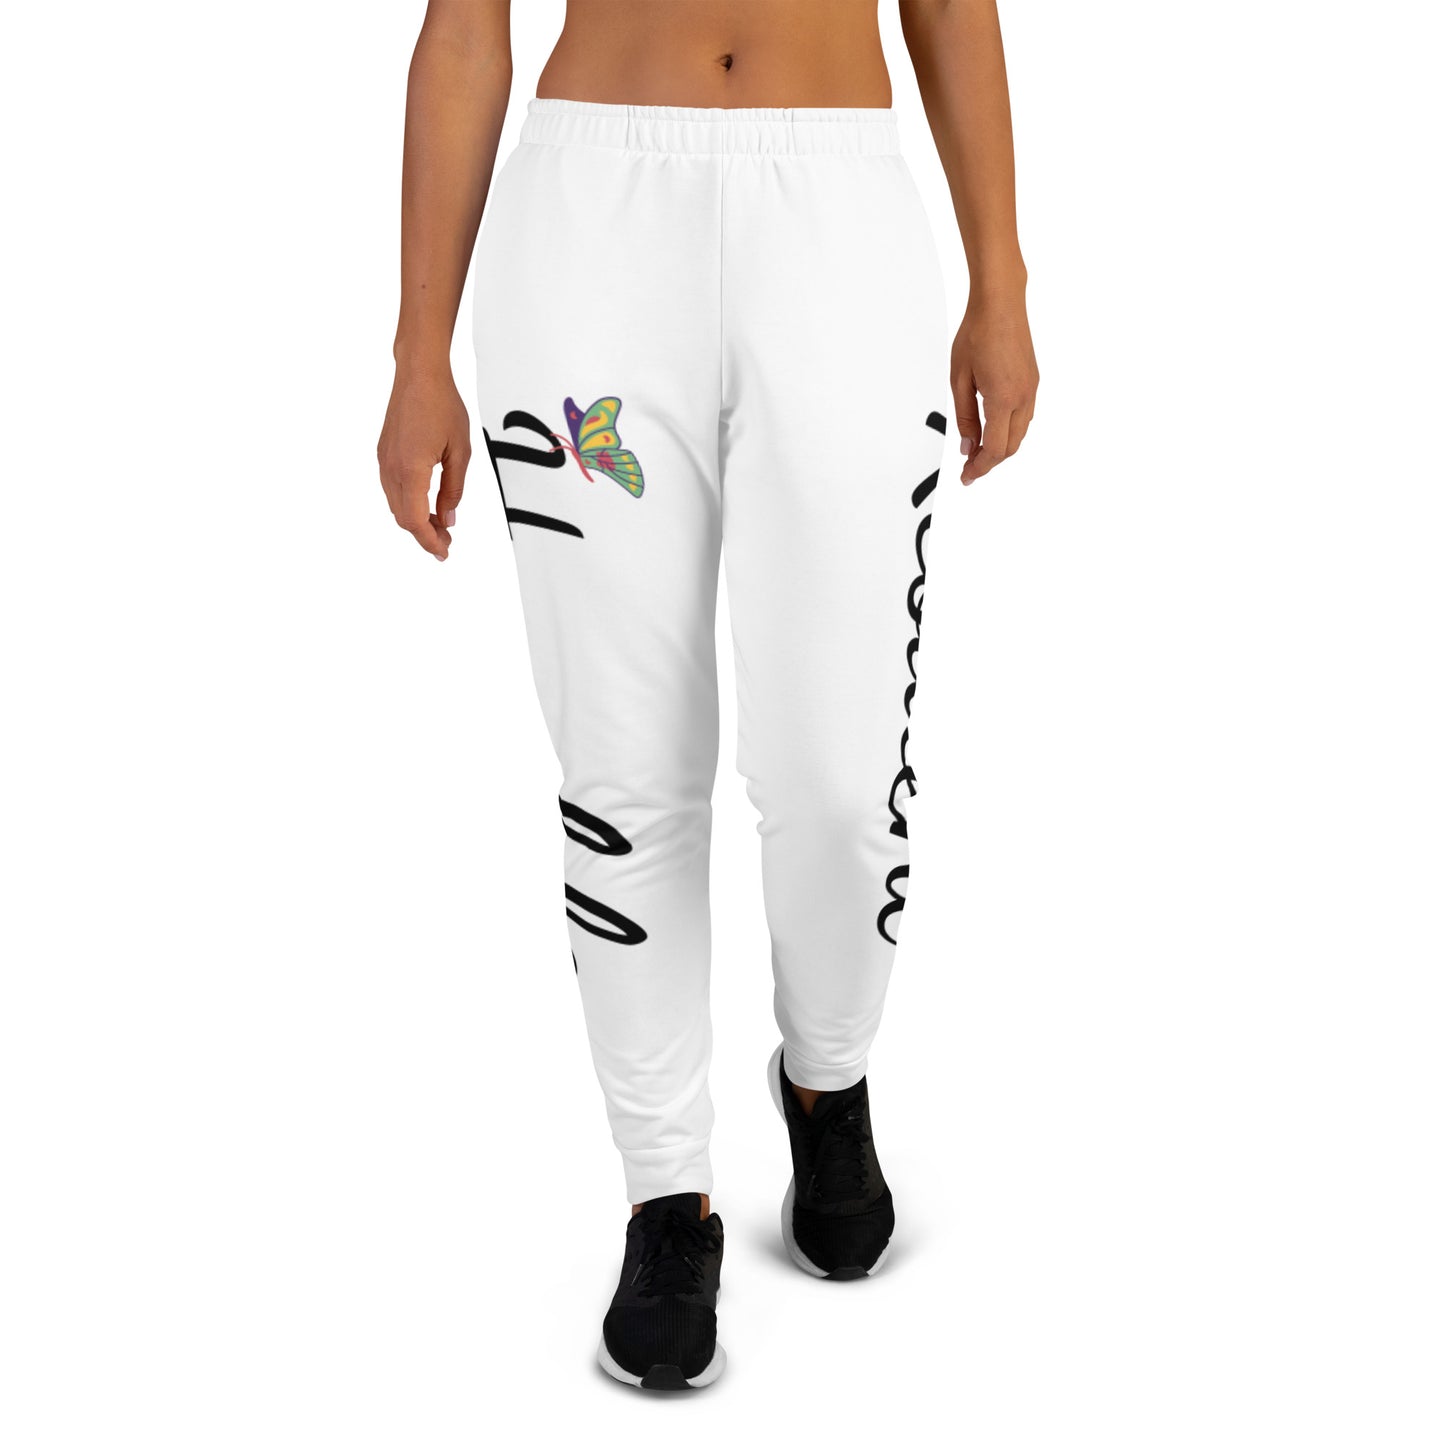 Humble & Resilient Women's Joggers